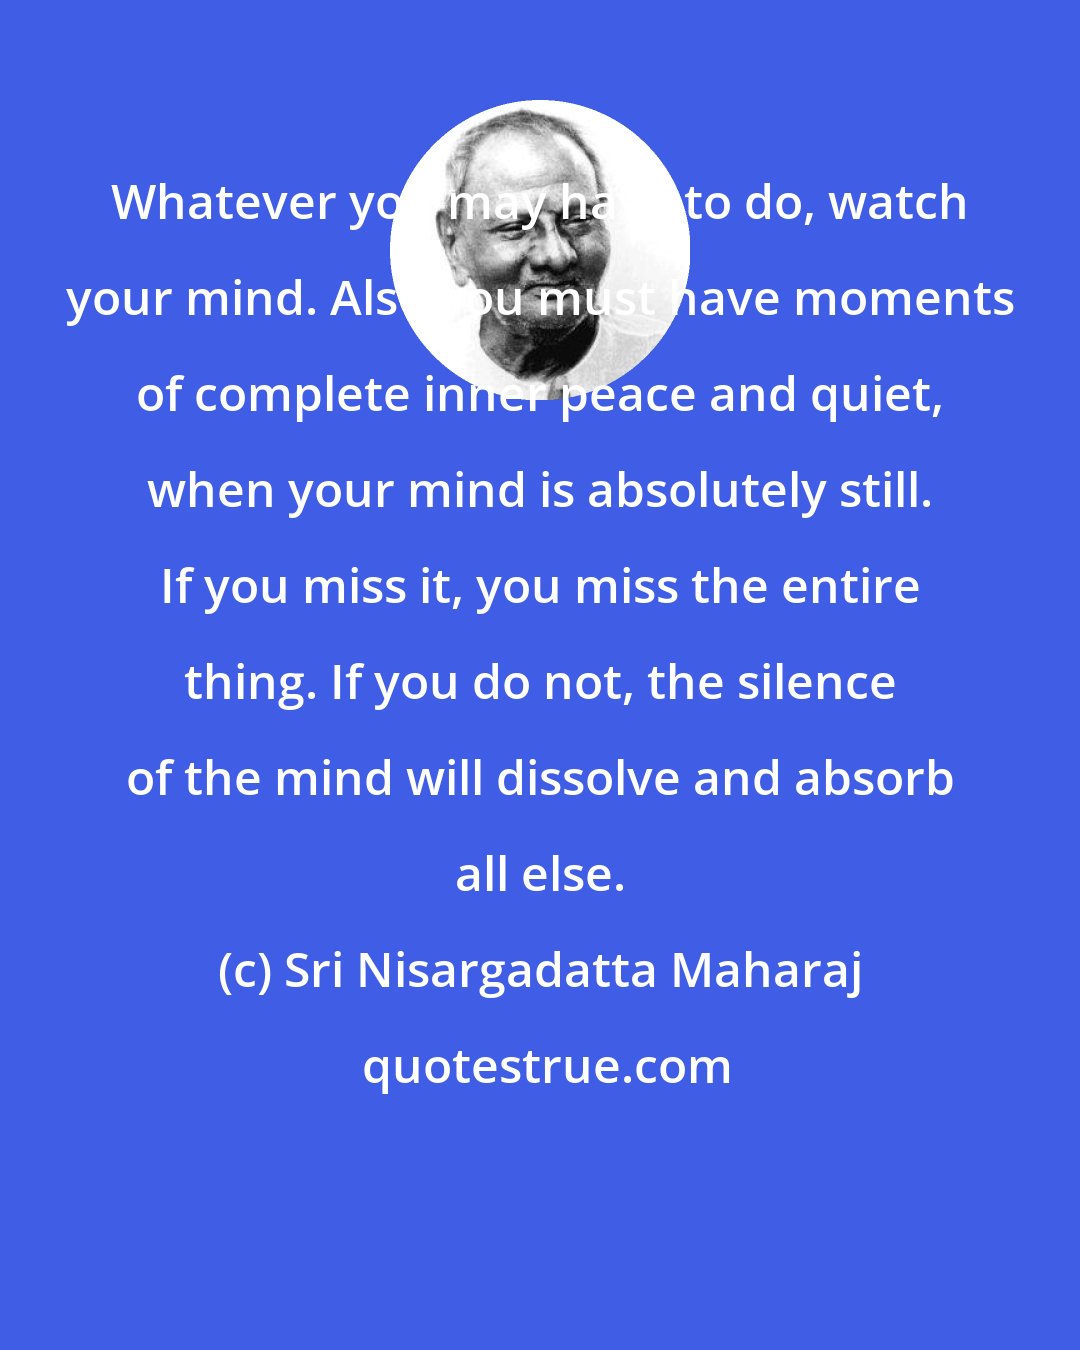 Sri Nisargadatta Maharaj: Whatever you may have to do, watch your mind. Also you must have moments of complete inner peace and quiet, when your mind is absolutely still. If you miss it, you miss the entire thing. If you do not, the silence of the mind will dissolve and absorb all else.